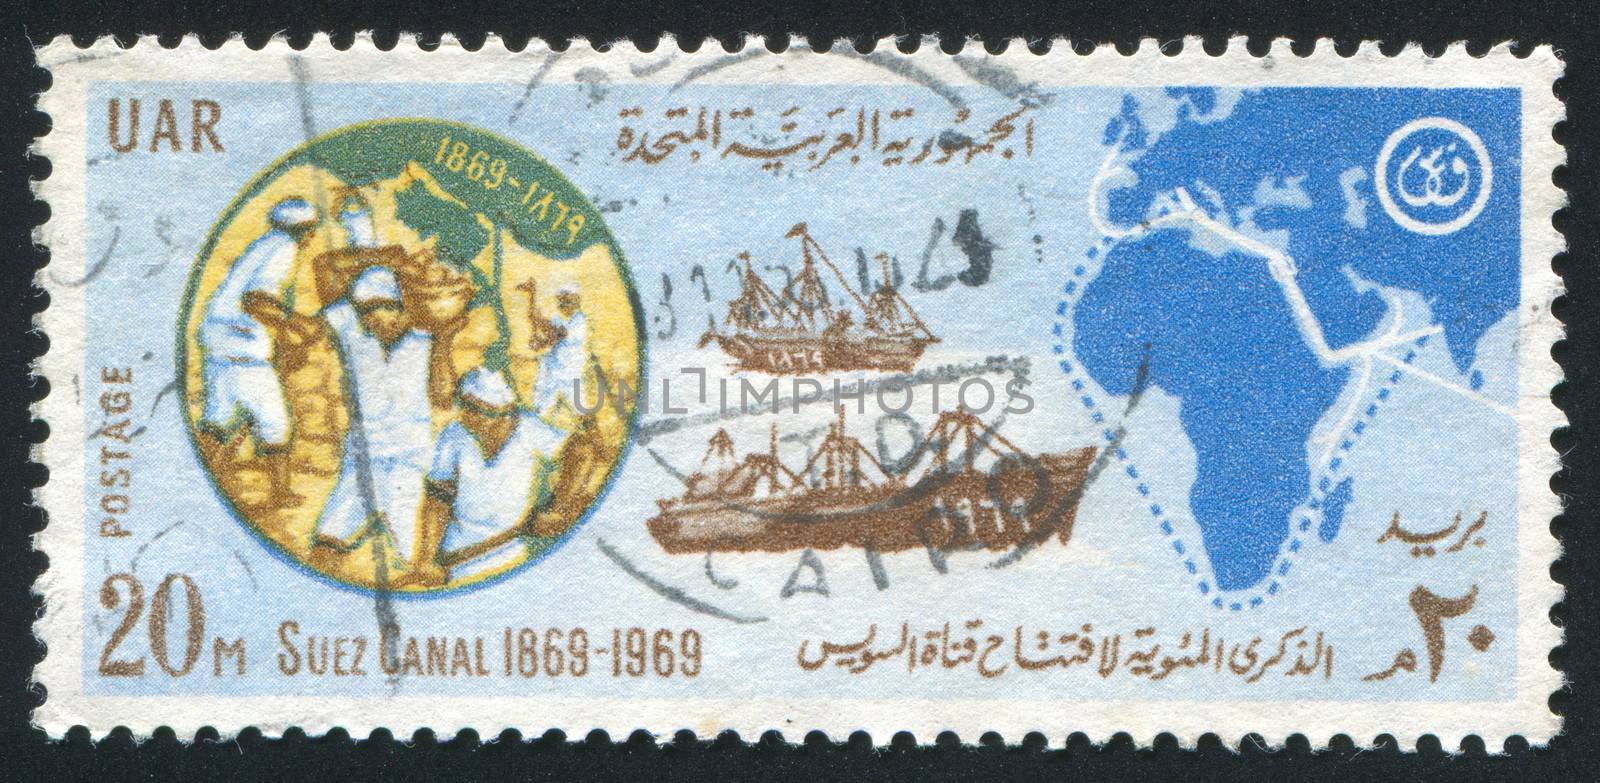 EGYPT - CIRCA 1969: stamp printed by Egypt, shows Map, ships, loaders, circa 1969